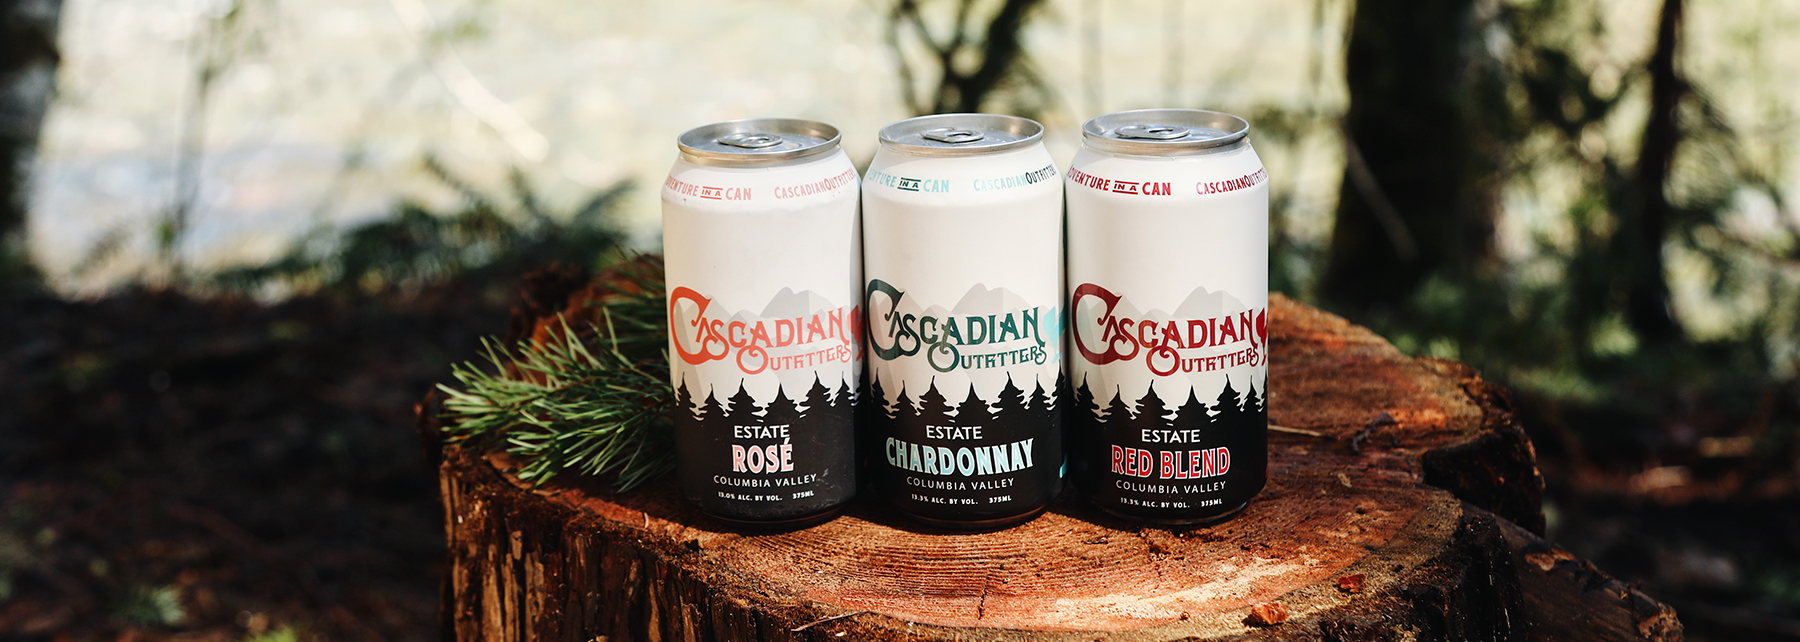 Cans of Cascadian Outfitters wine